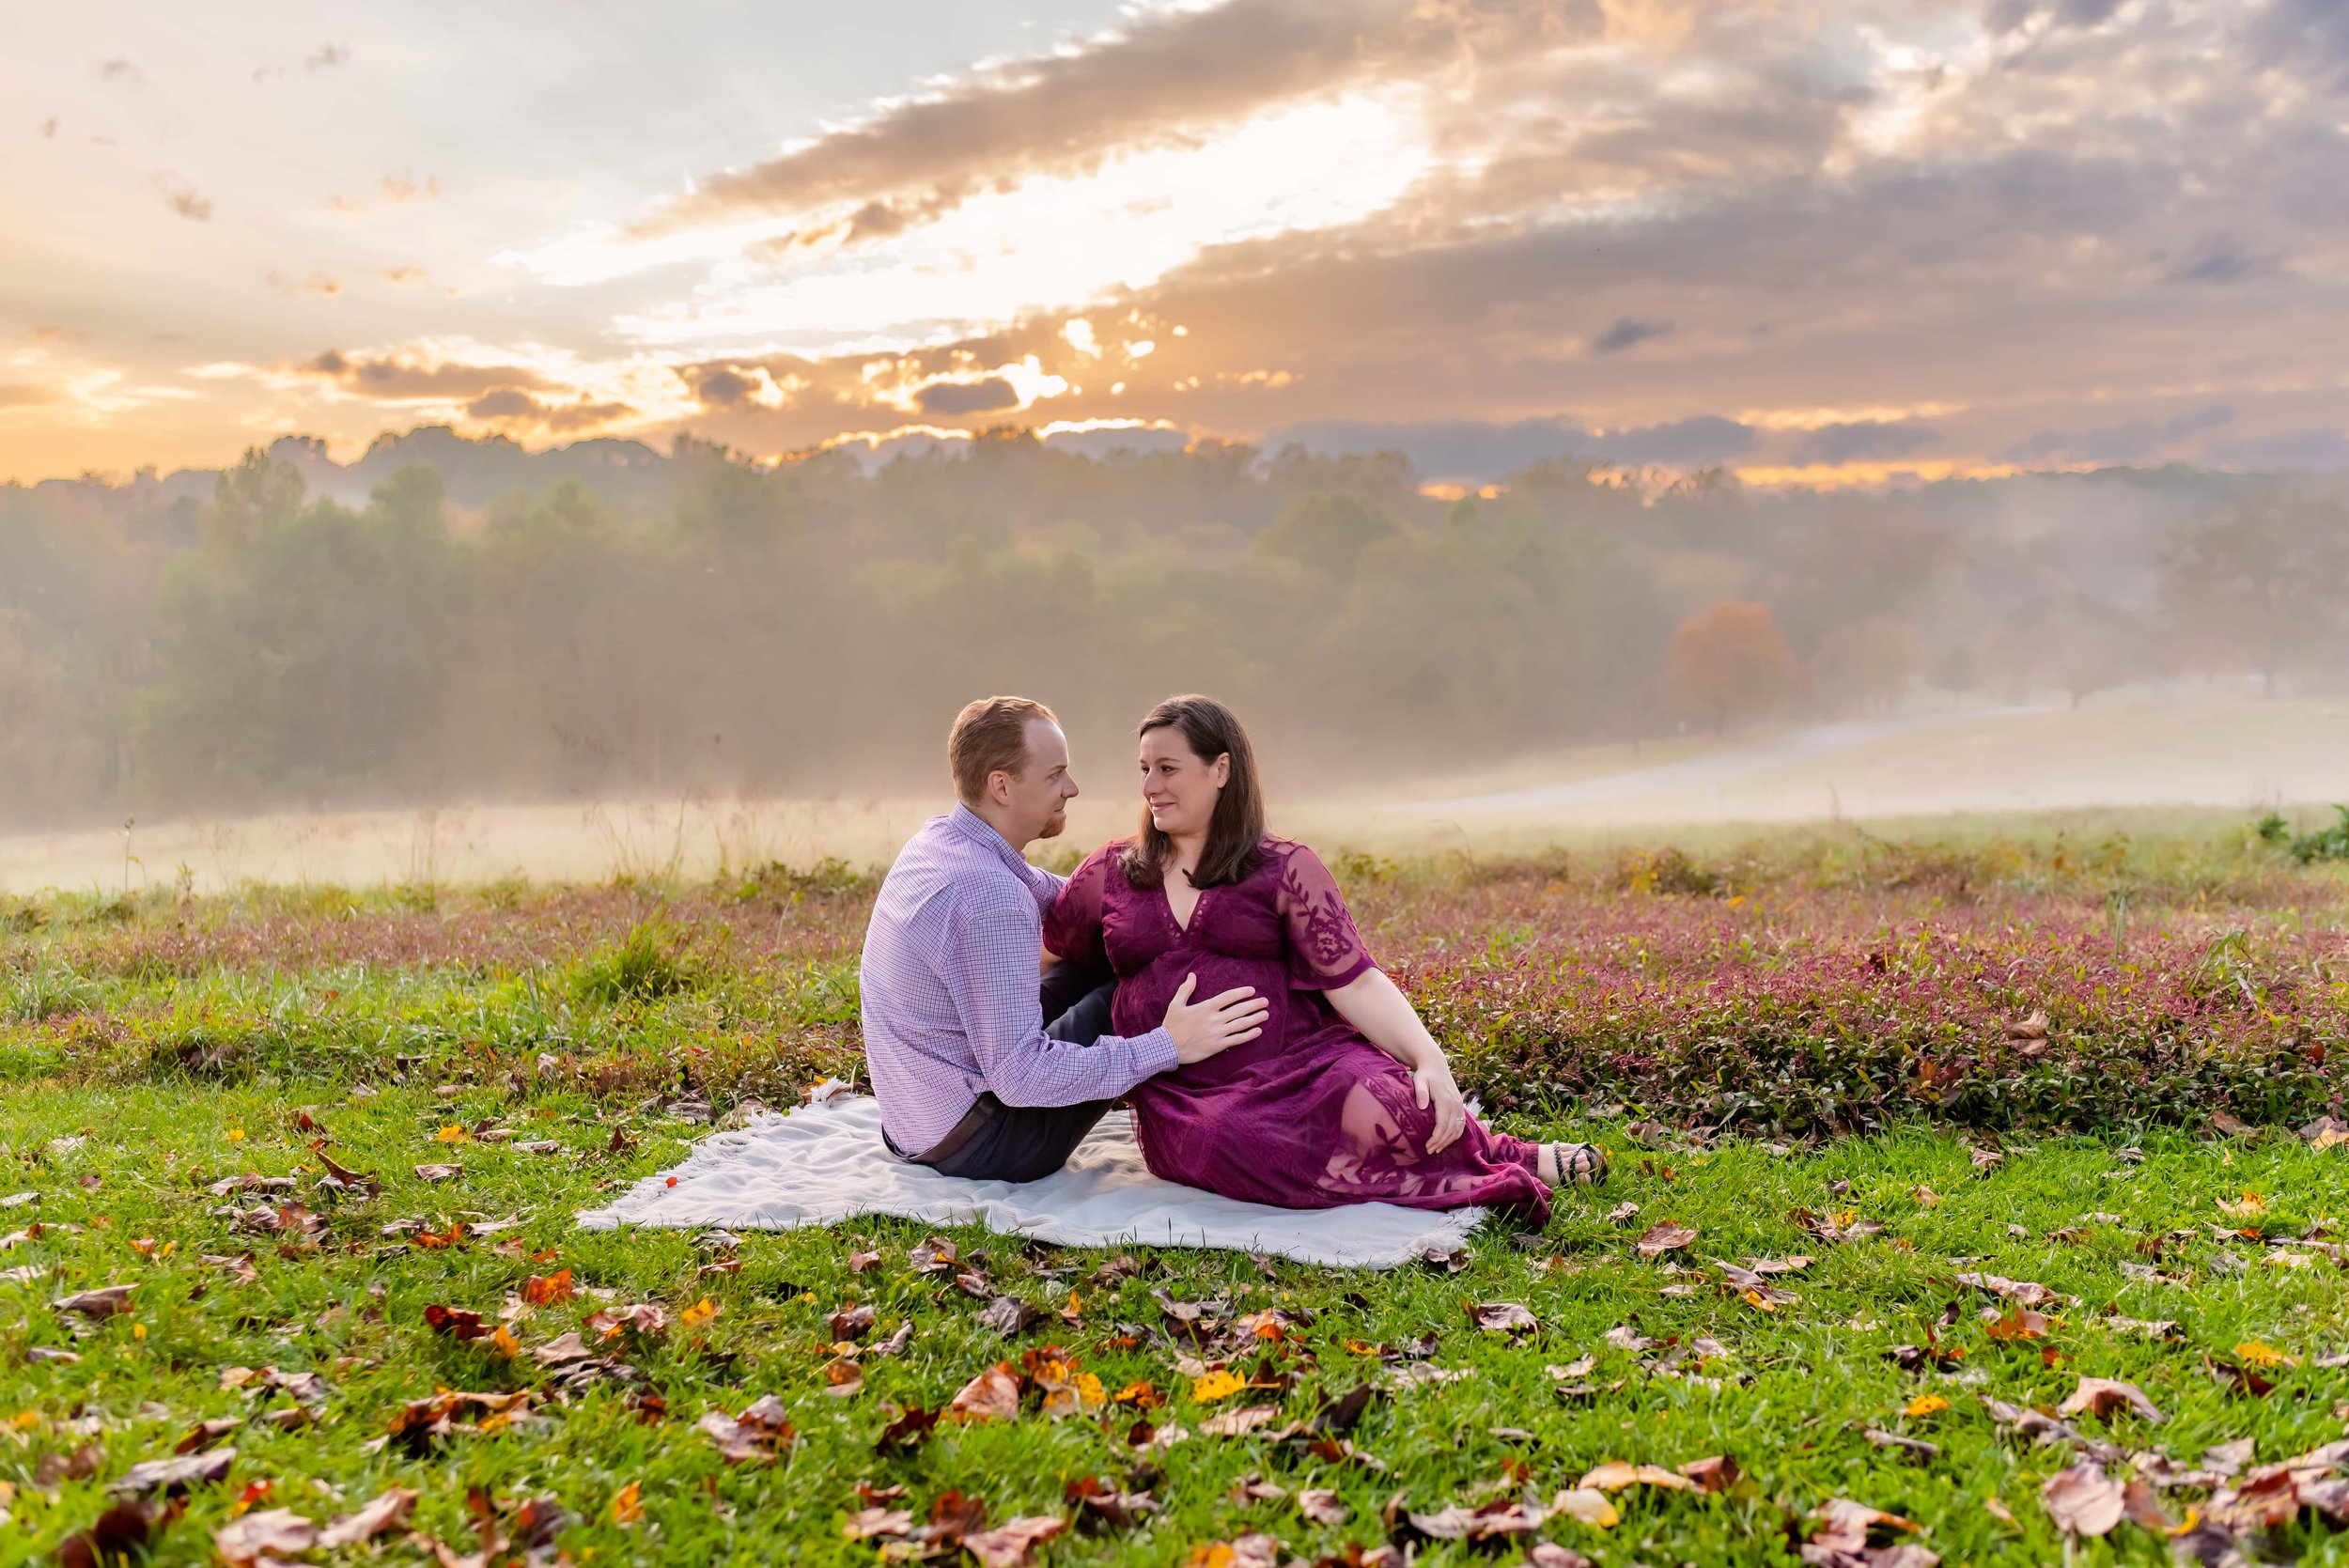 Maryland Maternity Photos - Husband and Wife Sitting in a Field